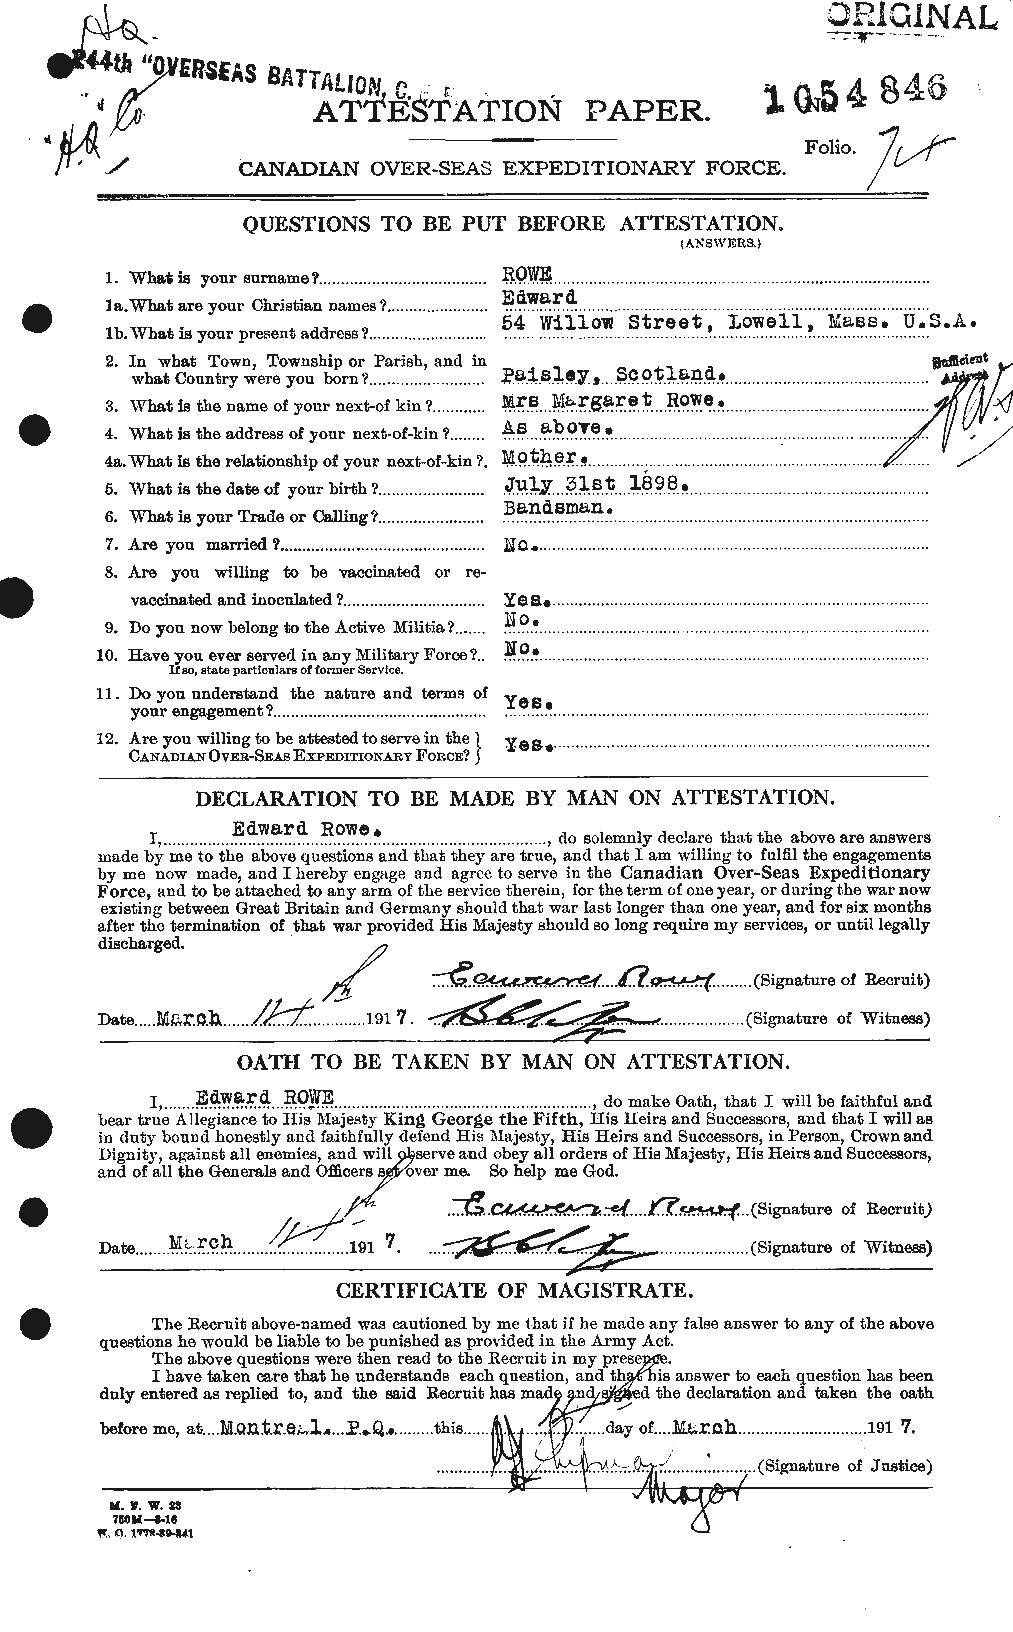 Personnel Records of the First World War - CEF 615832a